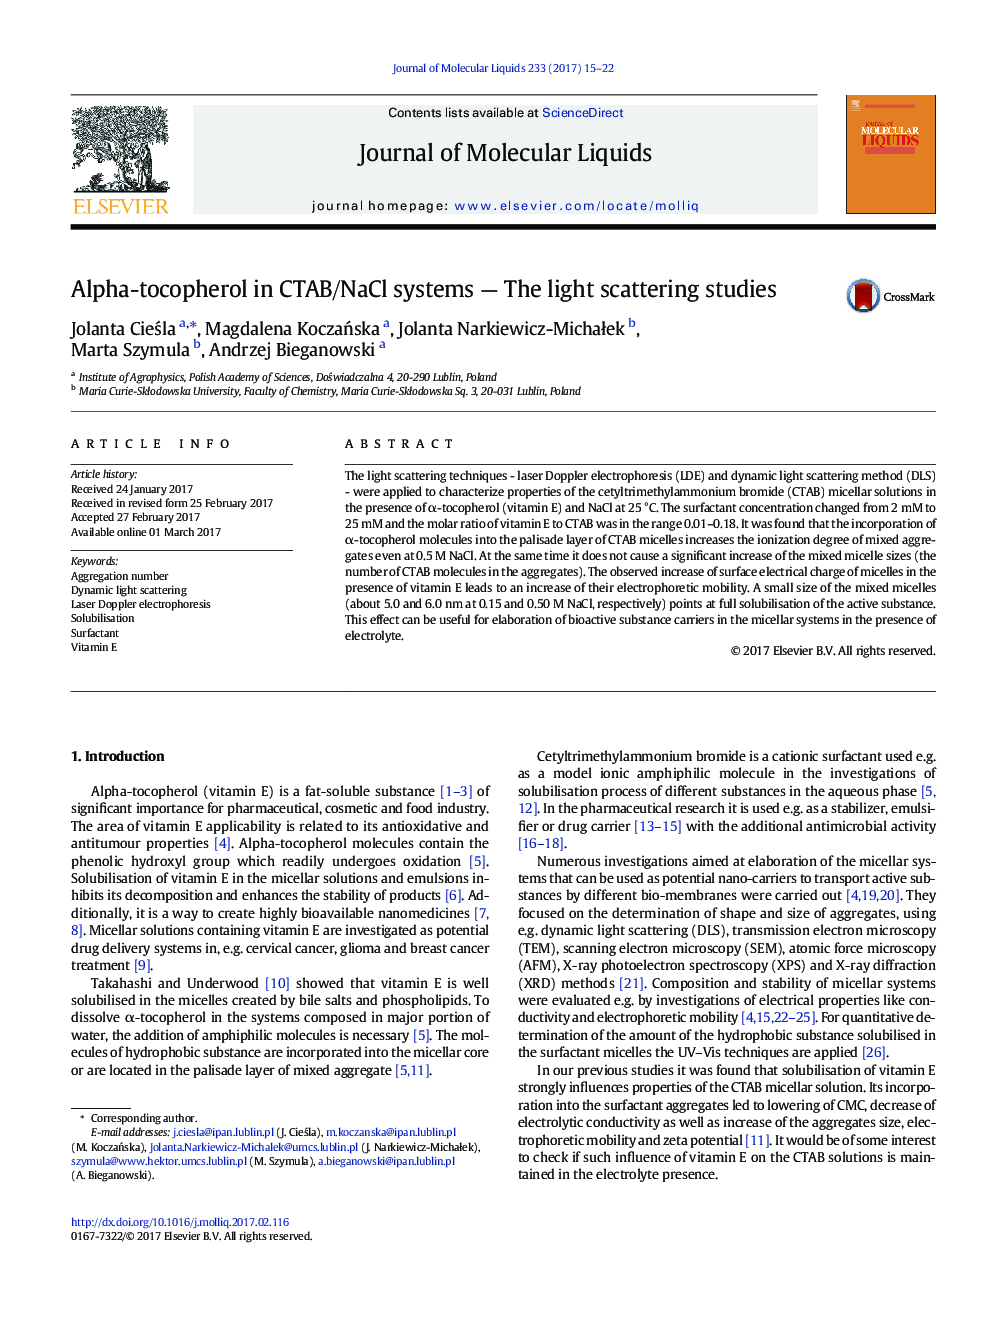 Alpha-tocopherol in CTAB/NaCl systems - The light scattering studies